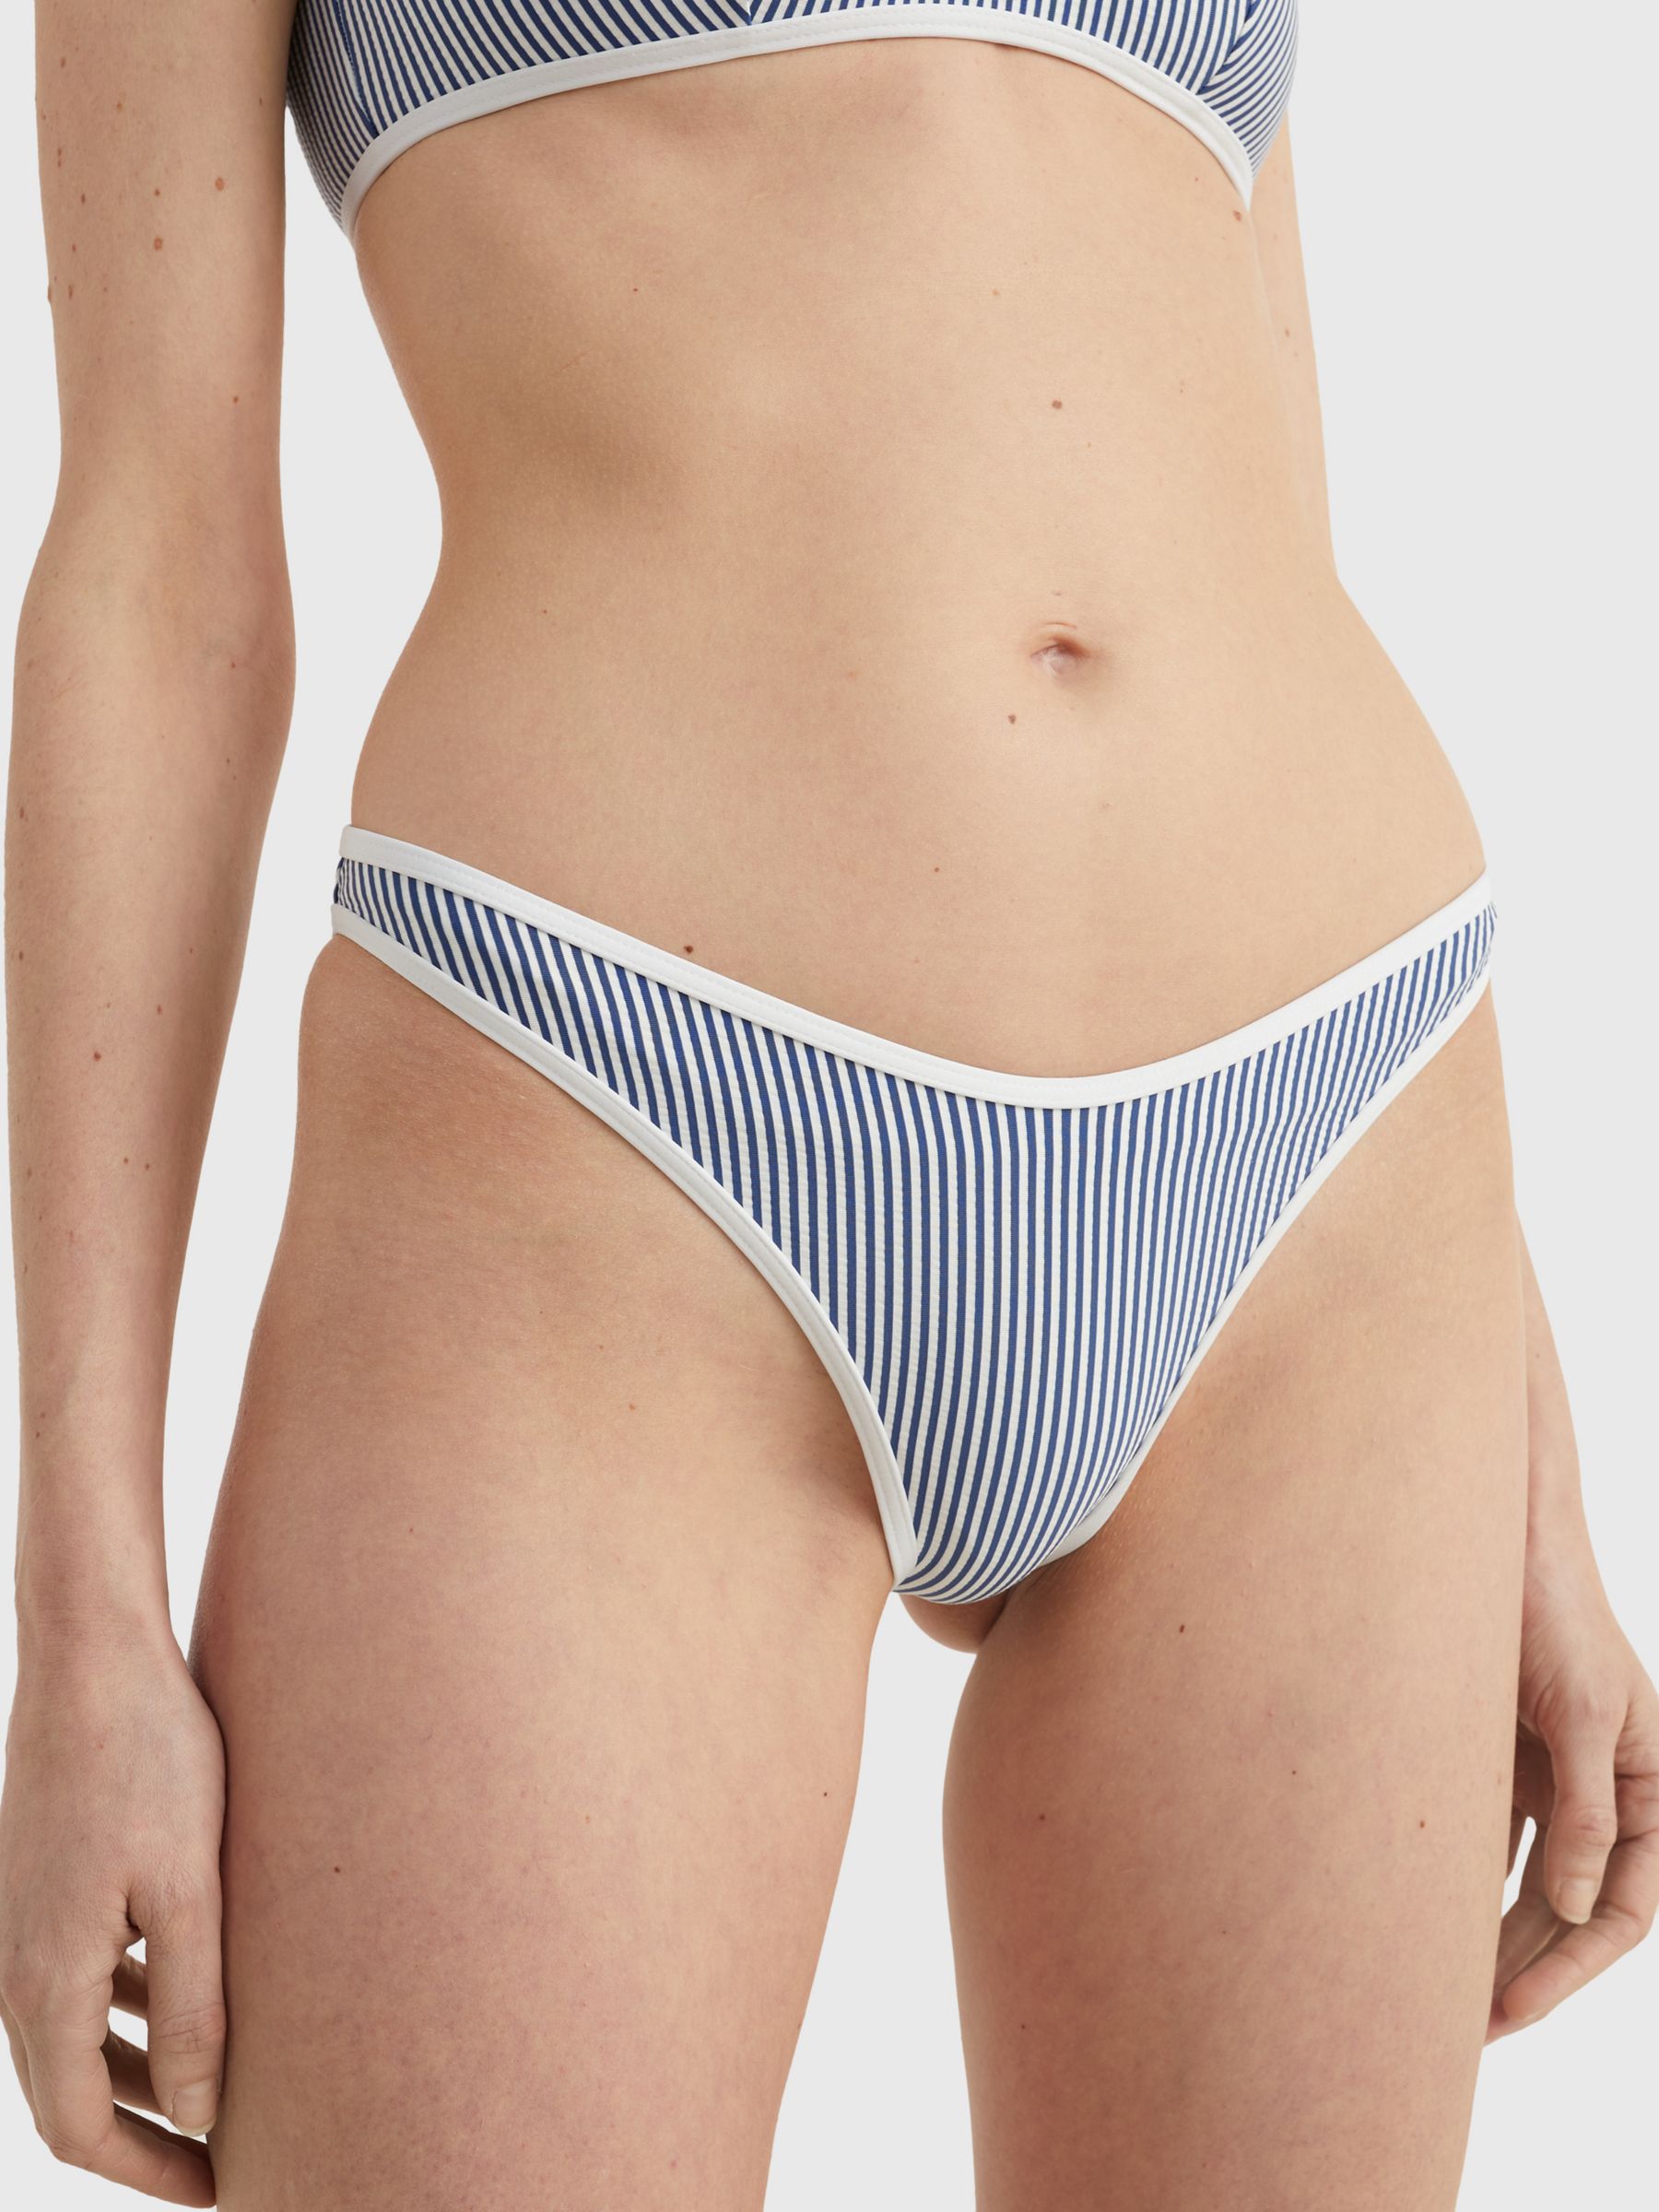 Mineral Undies Low Profile Thong - The Cove Boutique